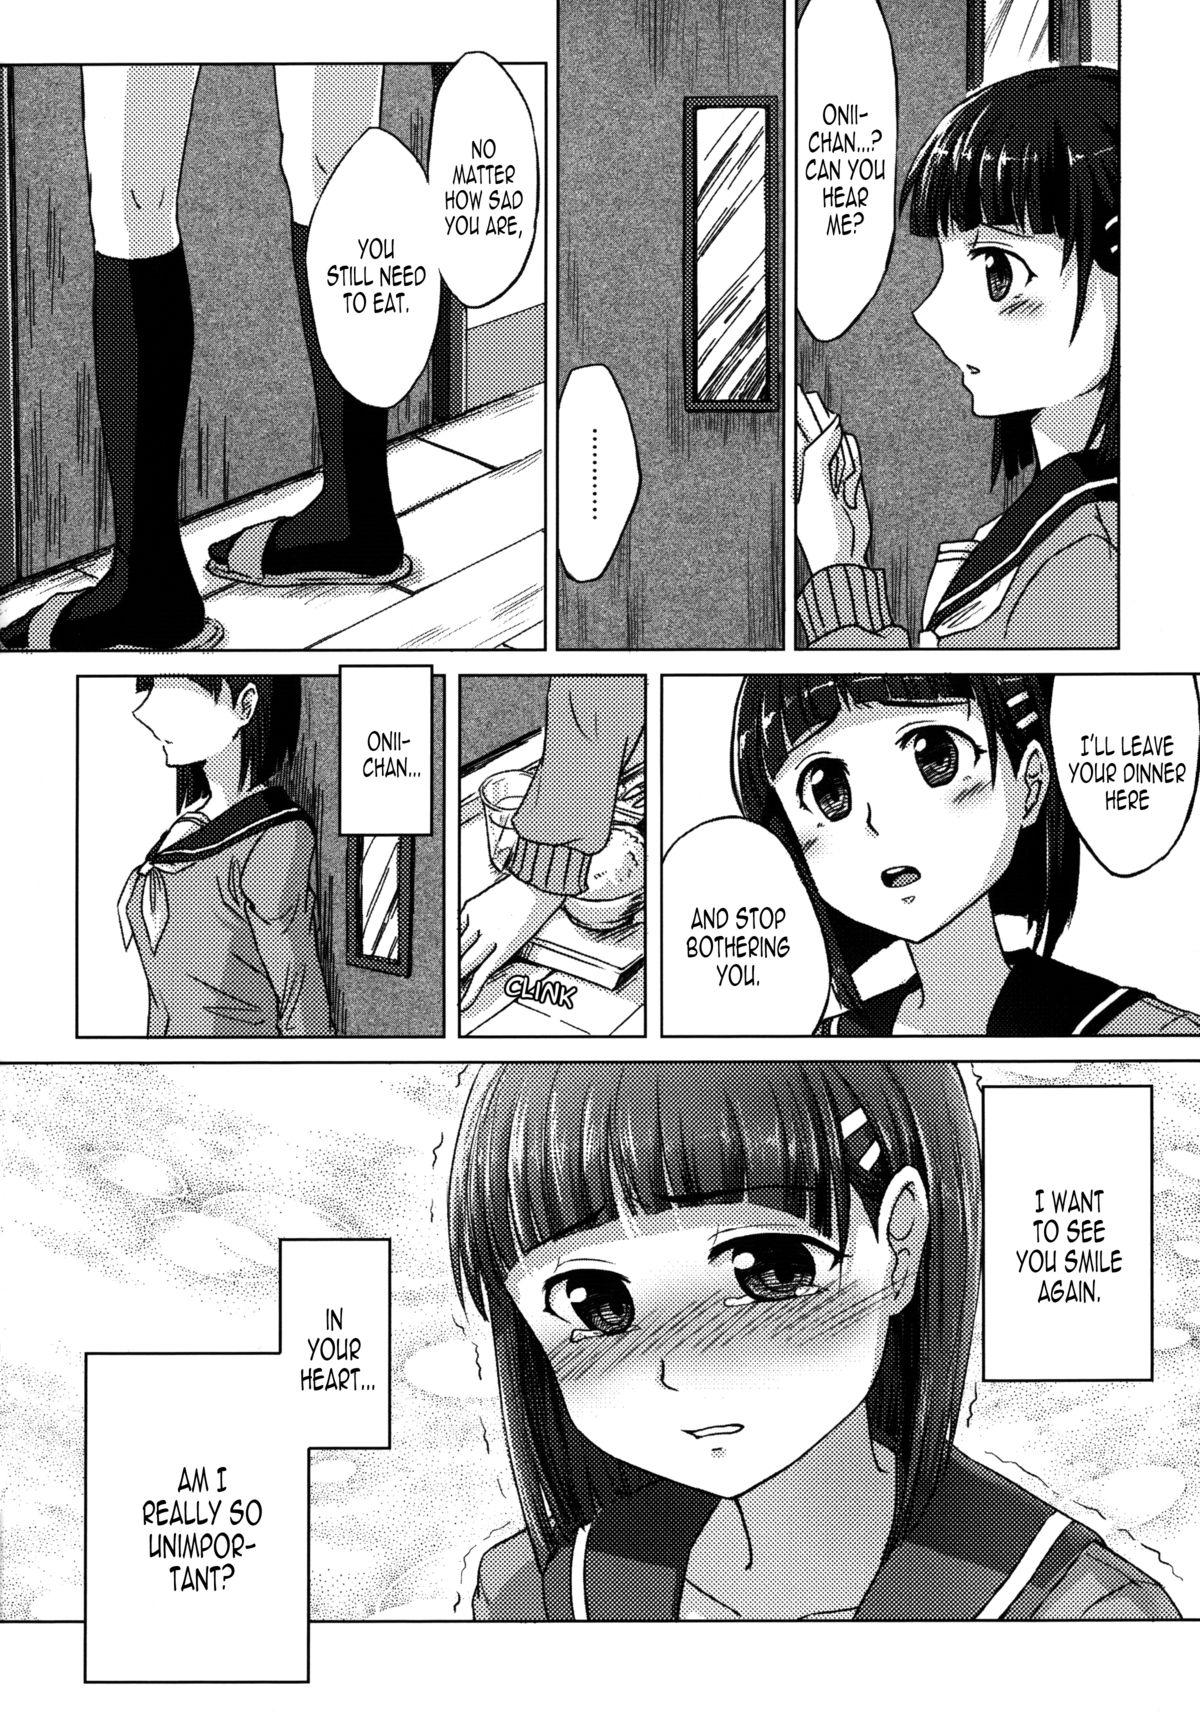 Indo Imouto no Mousou Record | Record of My Sister's Delusion - Sword art online Amateur Asian - Page 6